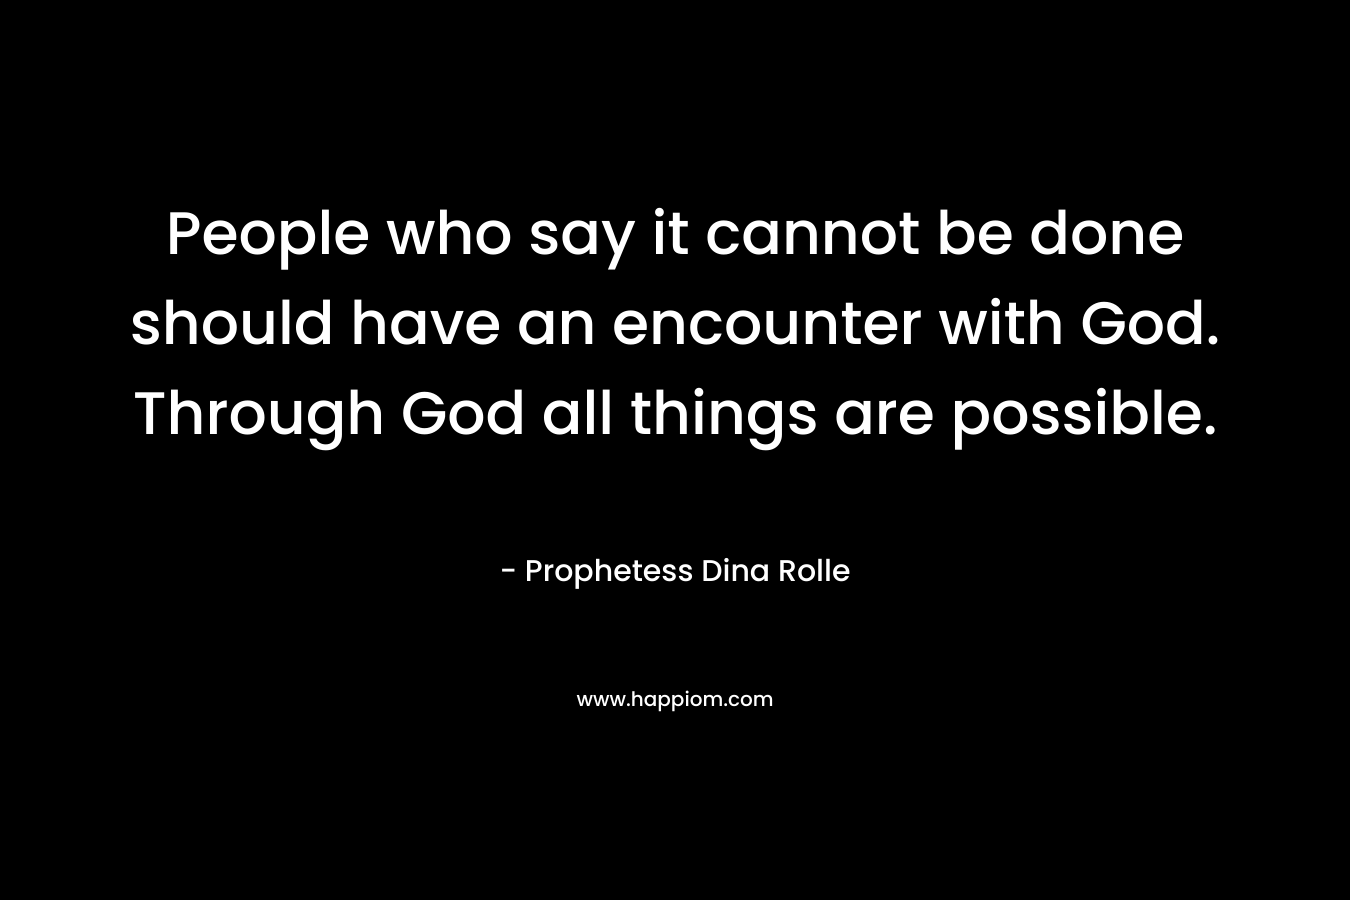 People who say it cannot be done should have an encounter with God. Through God all things are possible. – Prophetess Dina Rolle